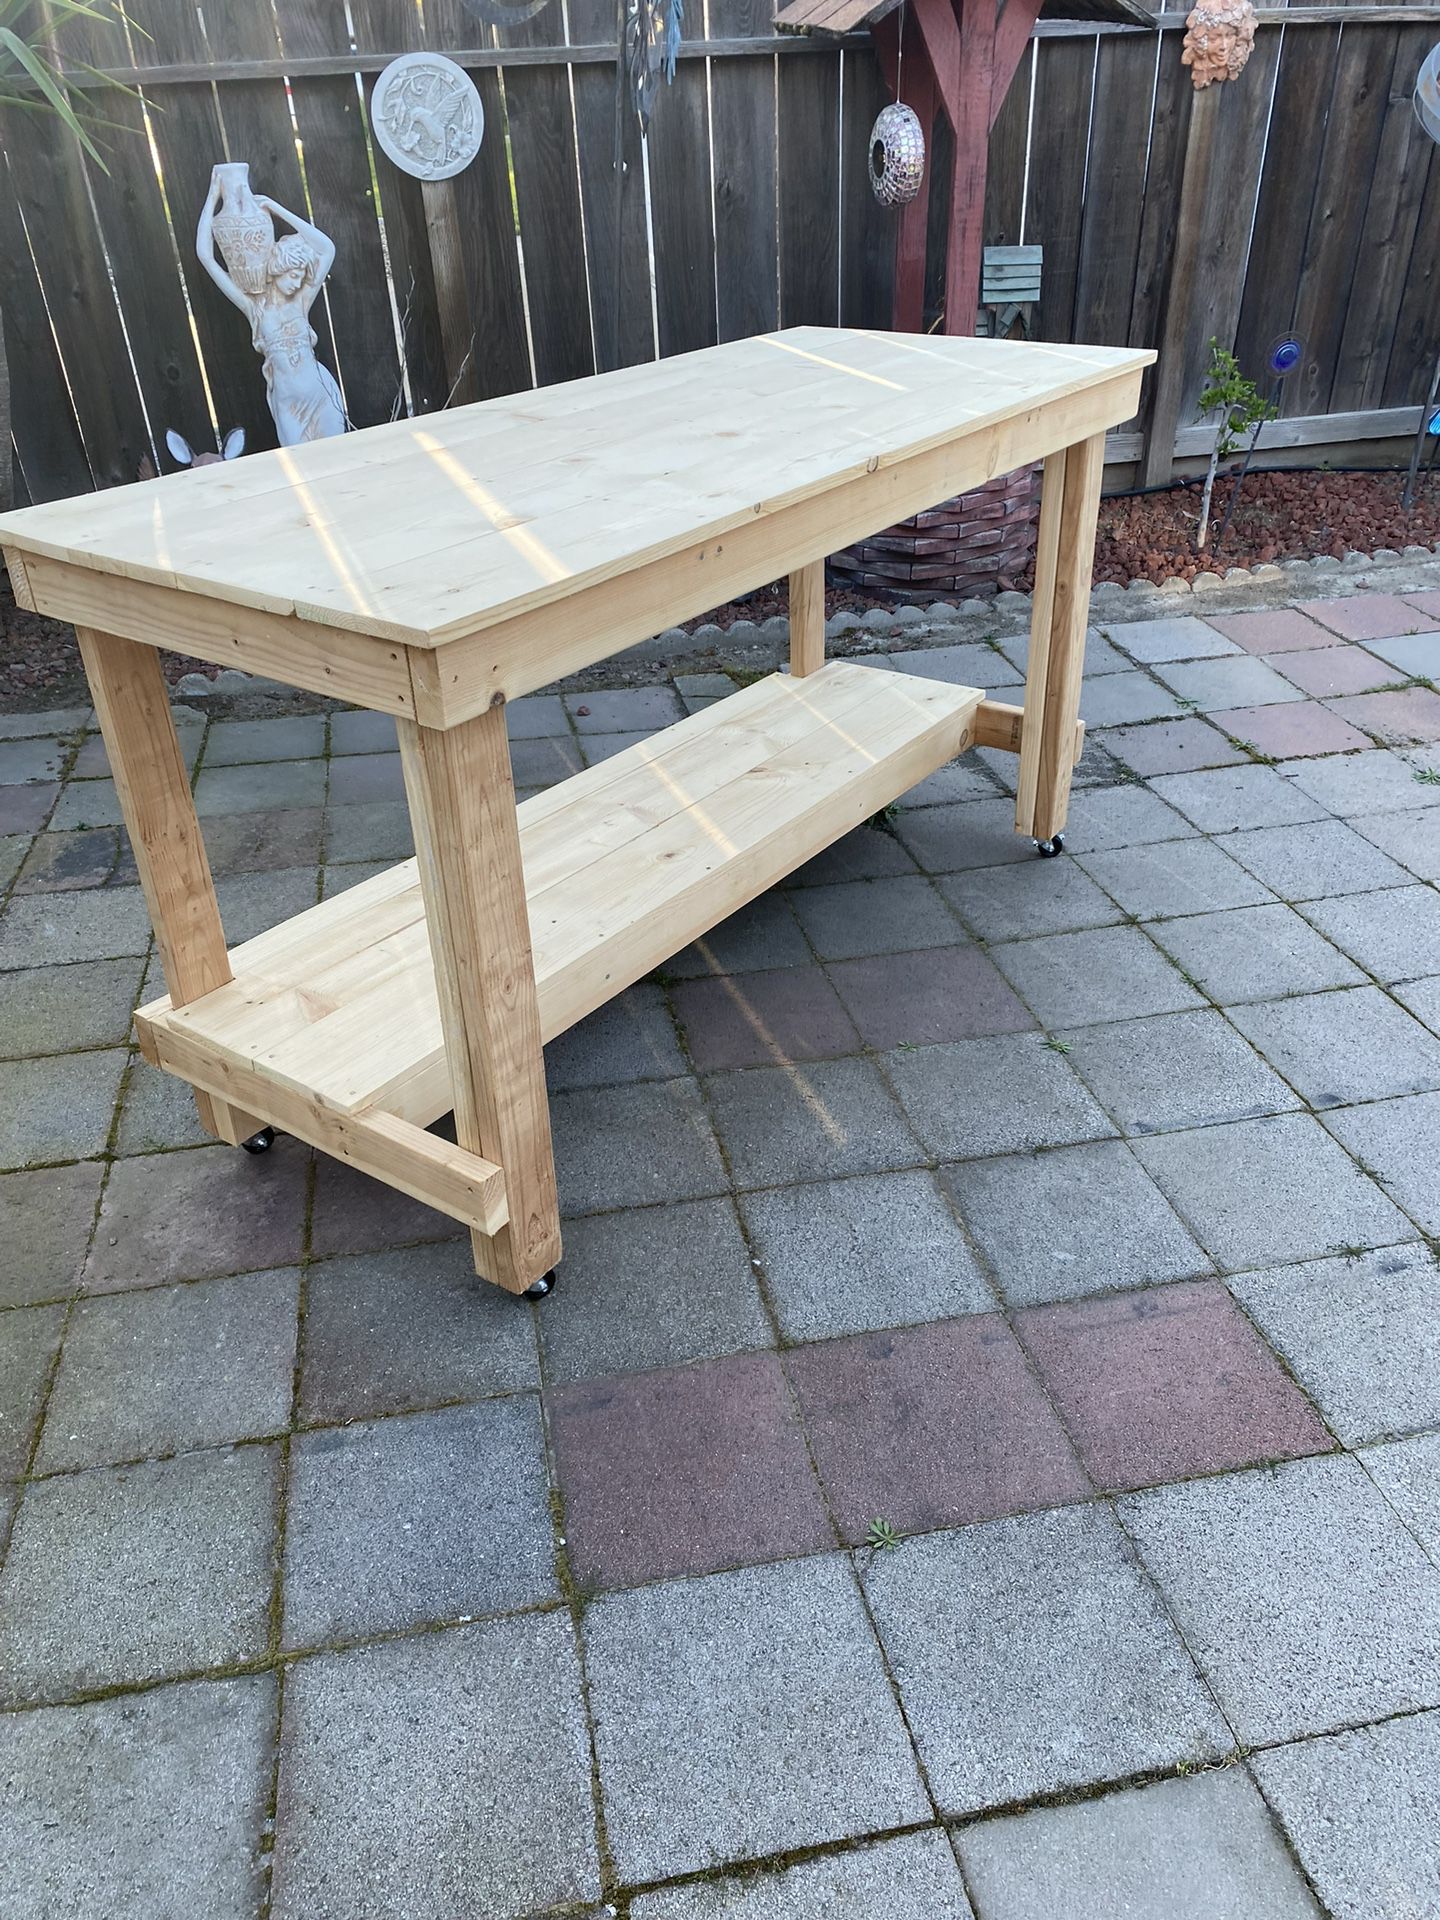 Work Bench/table